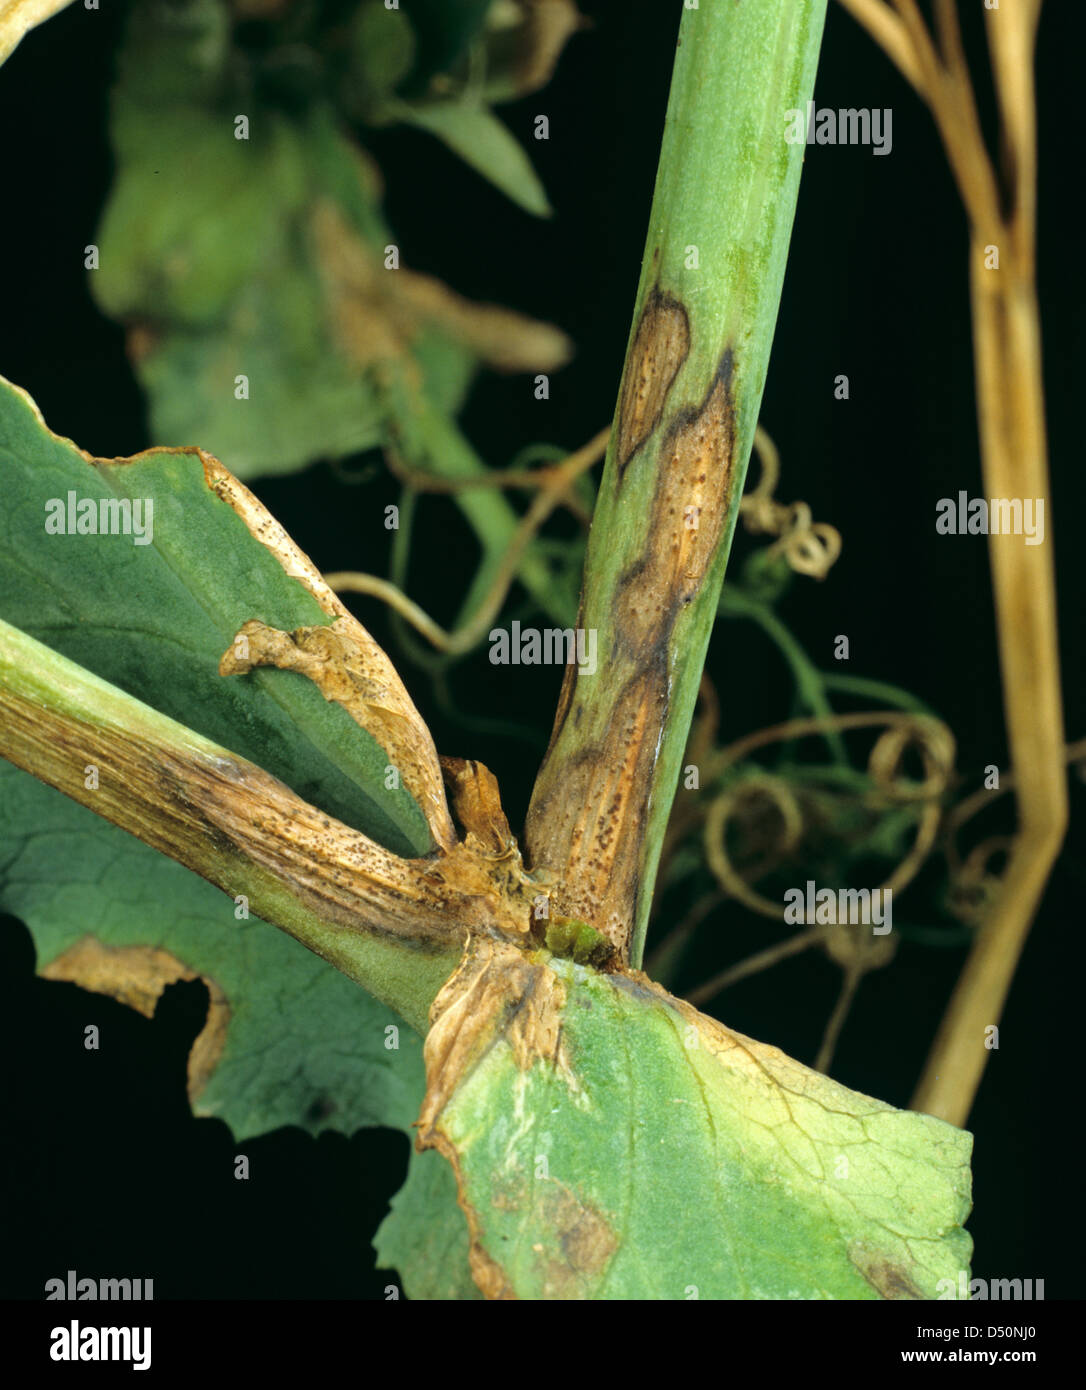 Pea leaf and stem spot, Ascochyta pisi, lesions with pycnidia on diseased pea plant Stock Photo